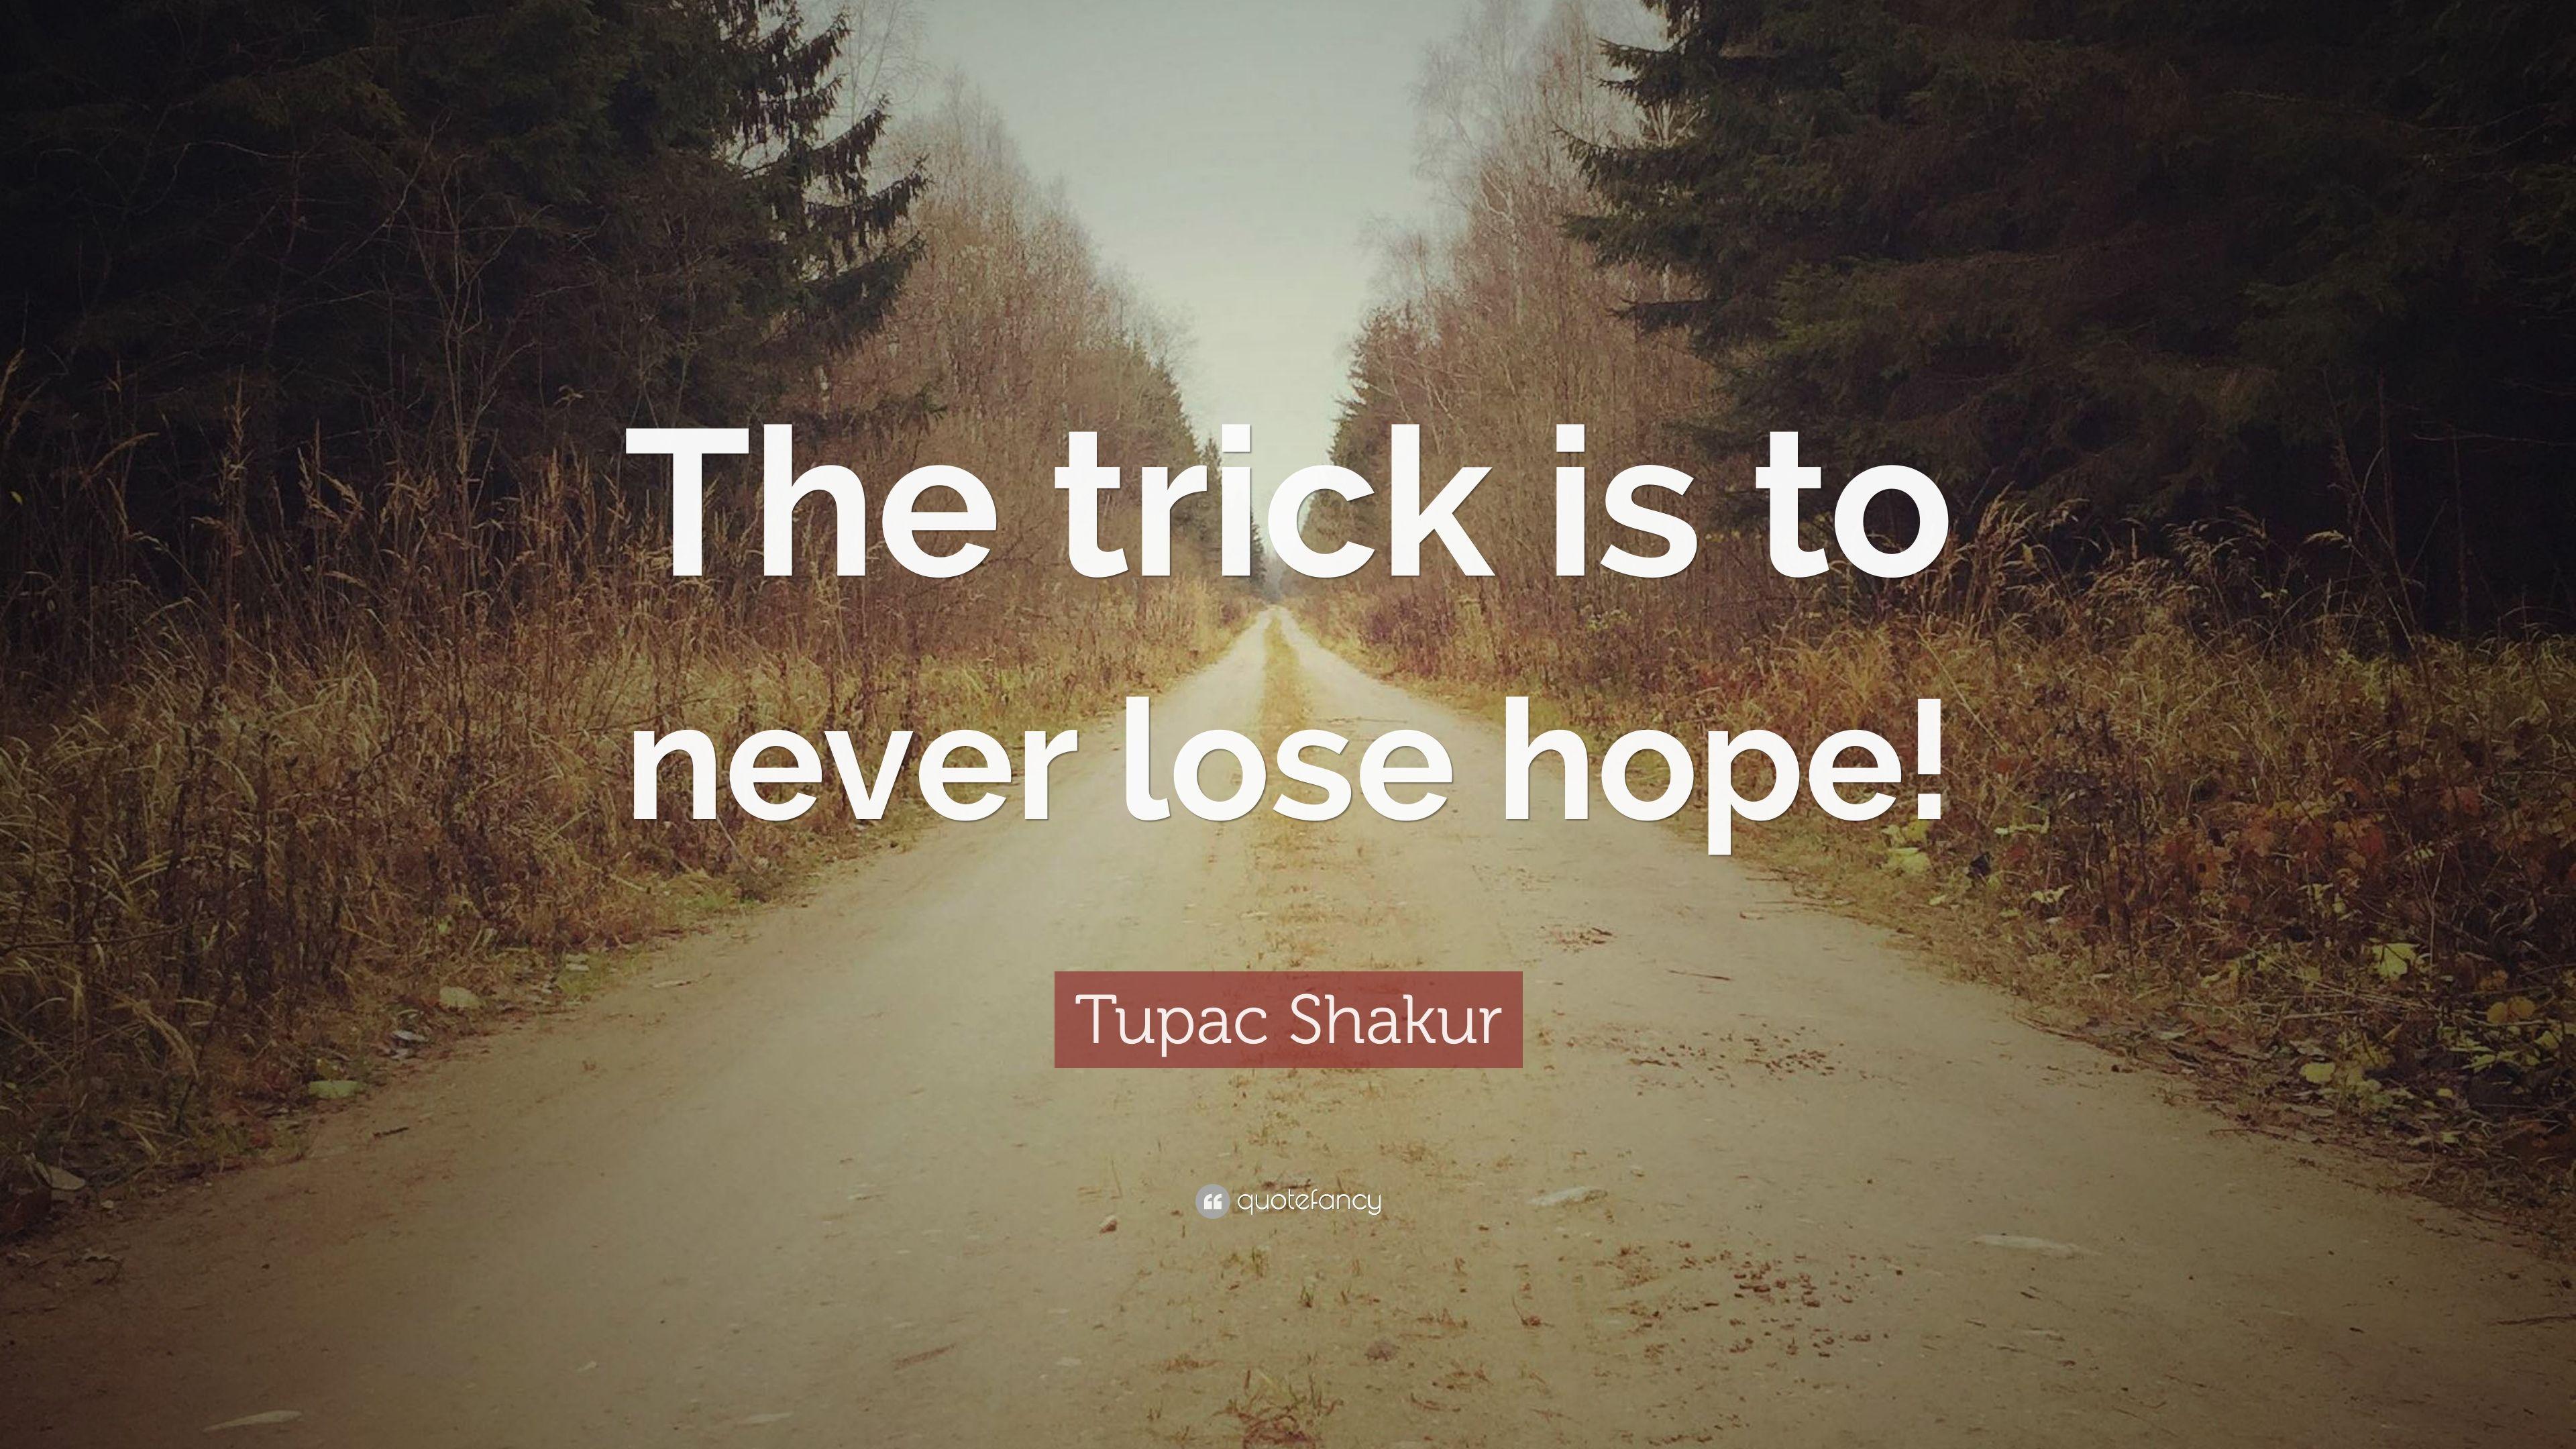 Tupac Shakur Quote: “The trick is to never lose hope!” 12